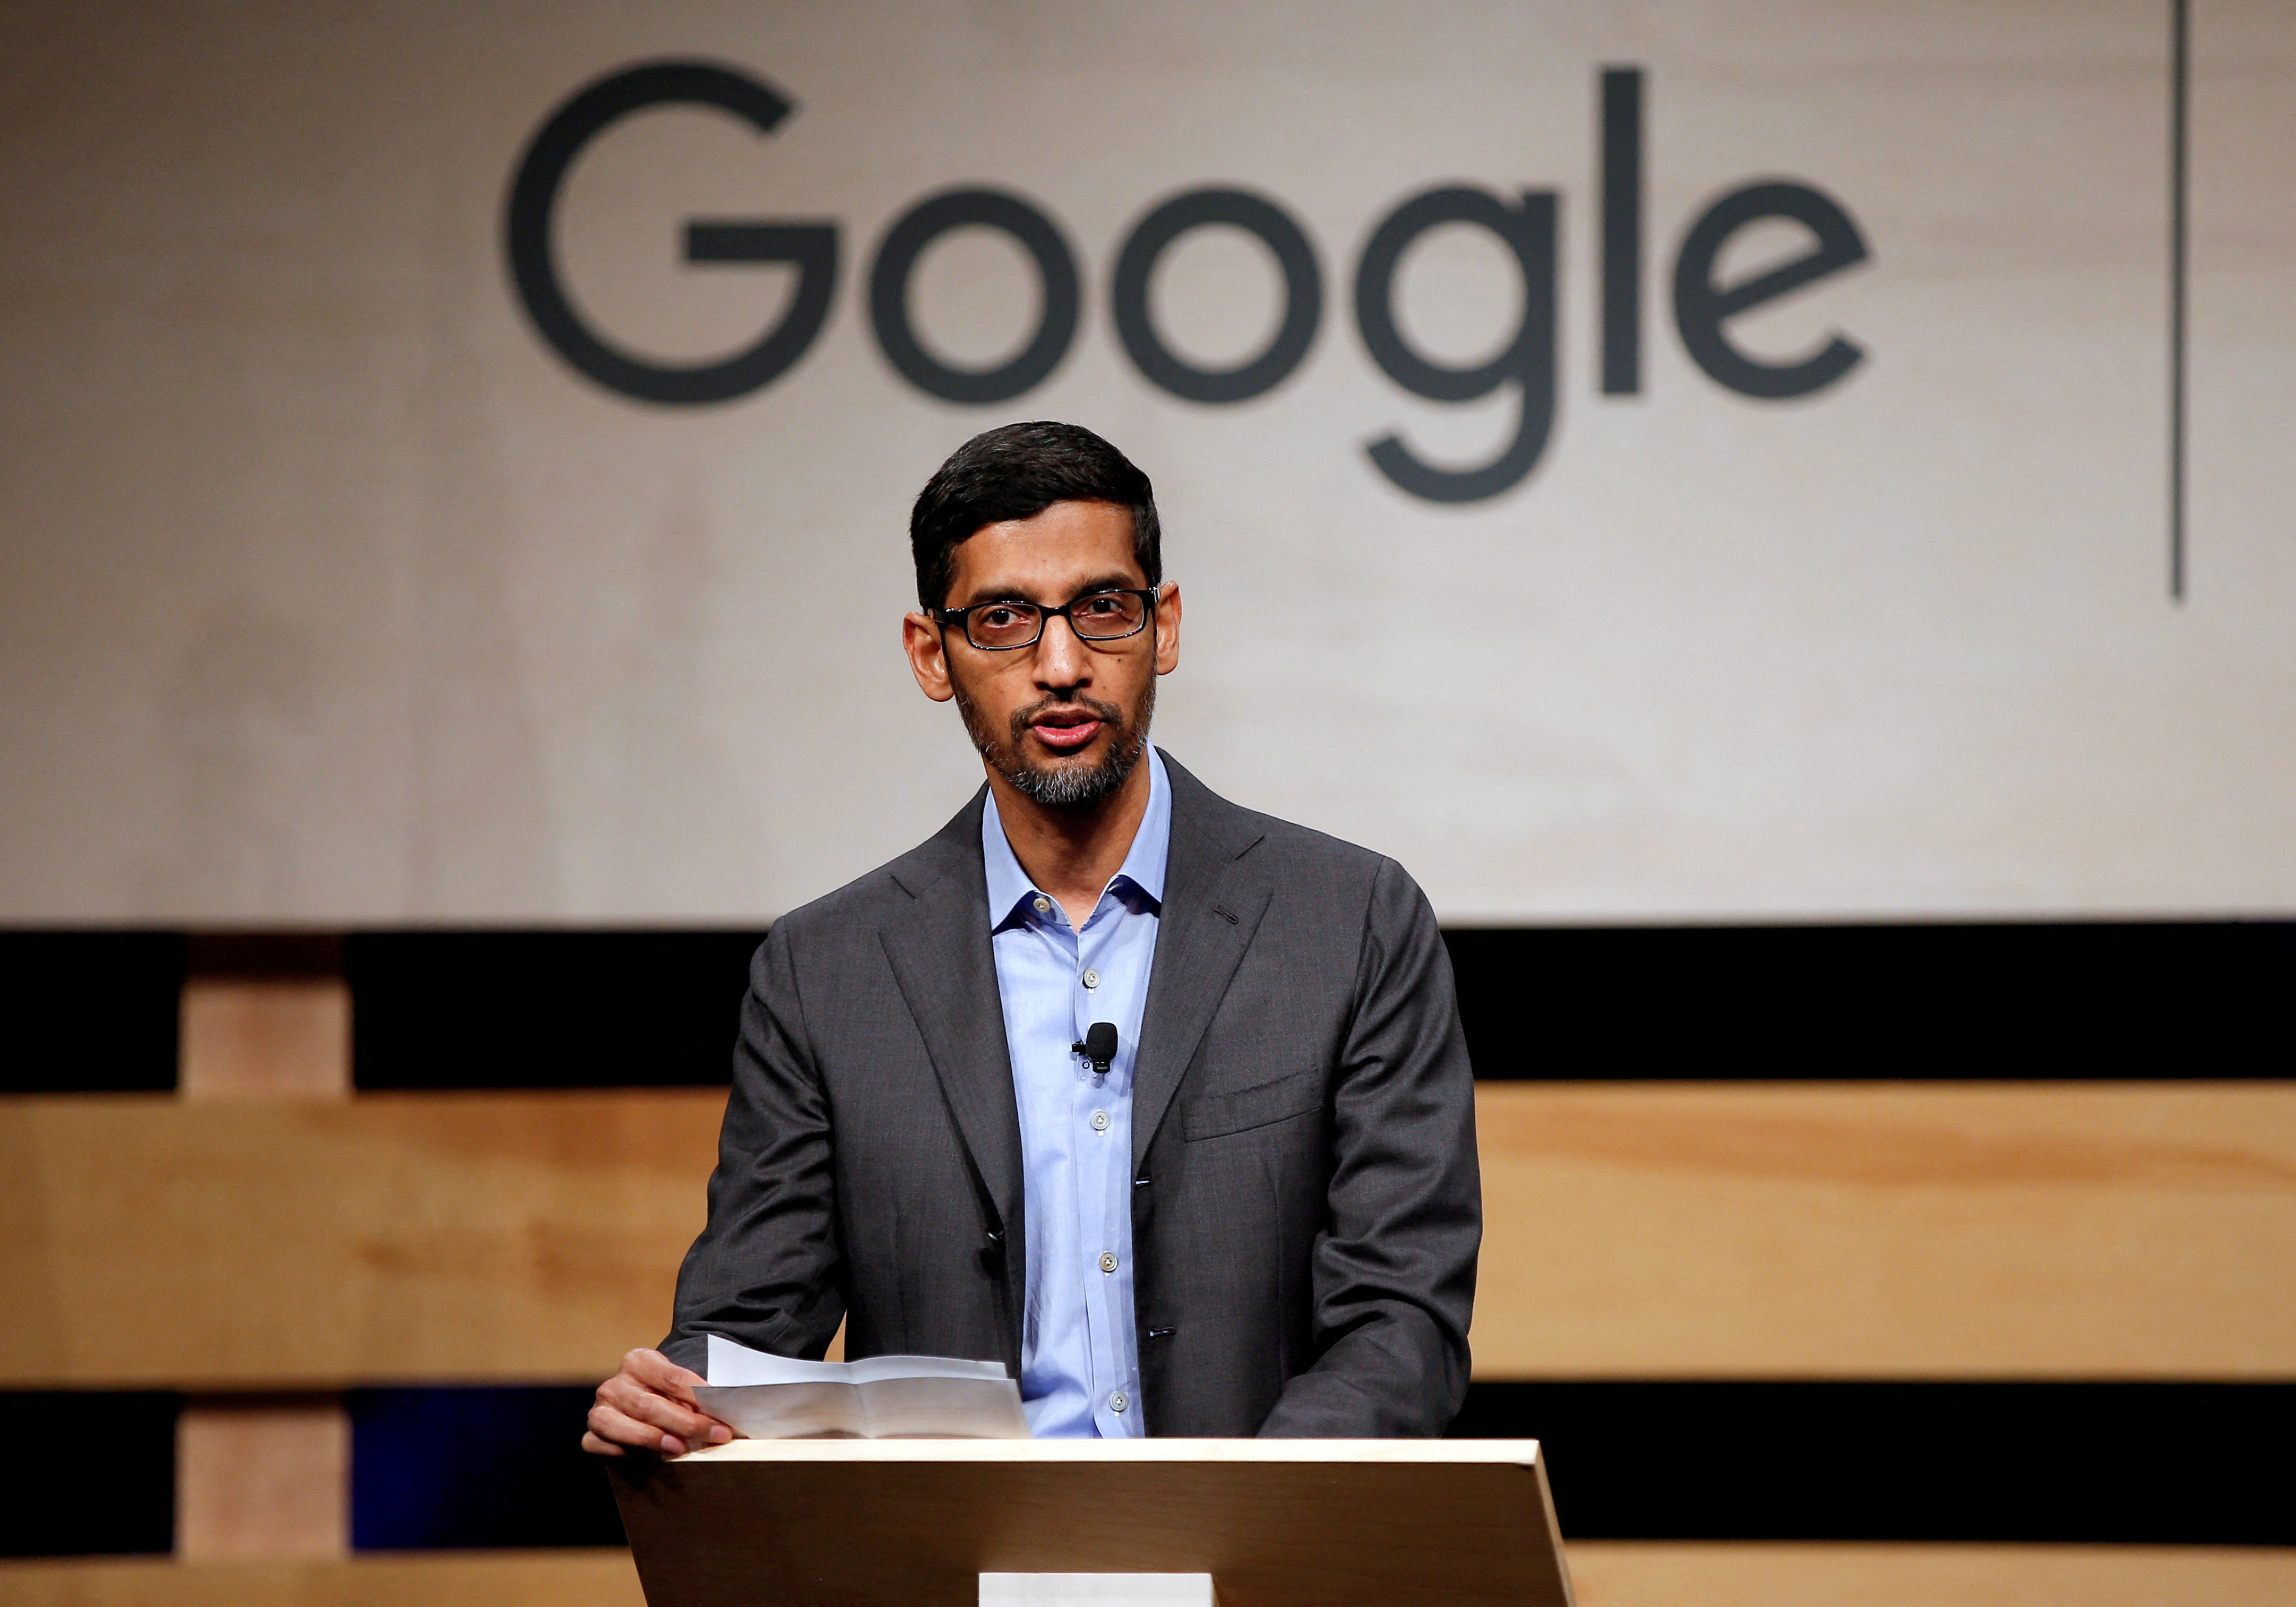 Google CEO Sundar Pichai speaks during signing ceremony committing Google to help expand information technology education at El Centro College in Dallas, Texas, U.S. October 3, 2019.